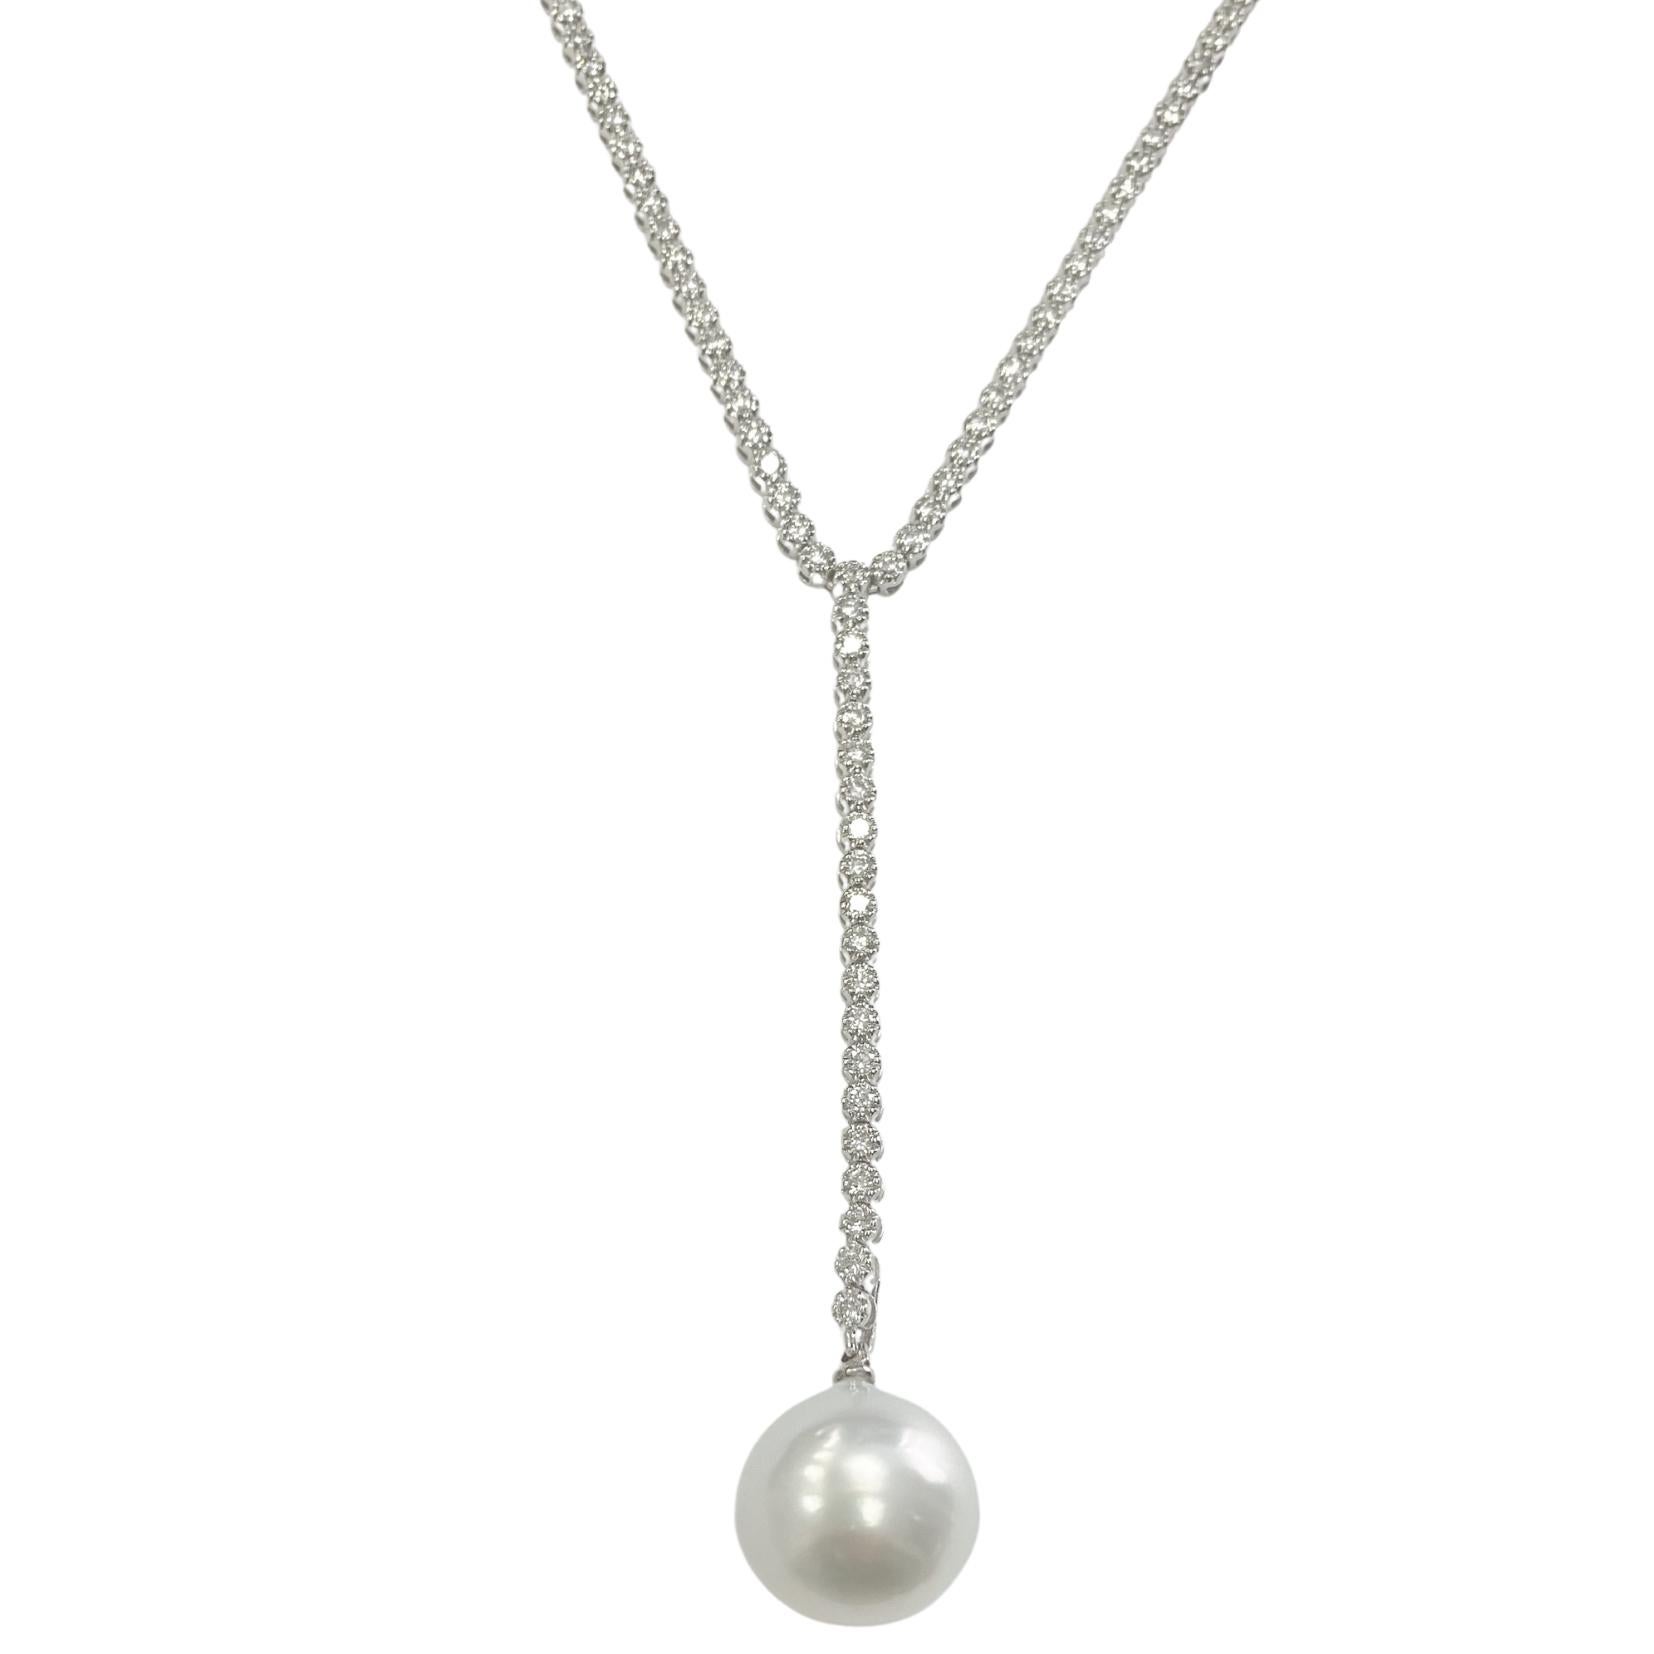 Contemporary 21st Century 18 Karat White Gold and F/G VVS Diamond and Pearl Lavalier Necklace For Sale